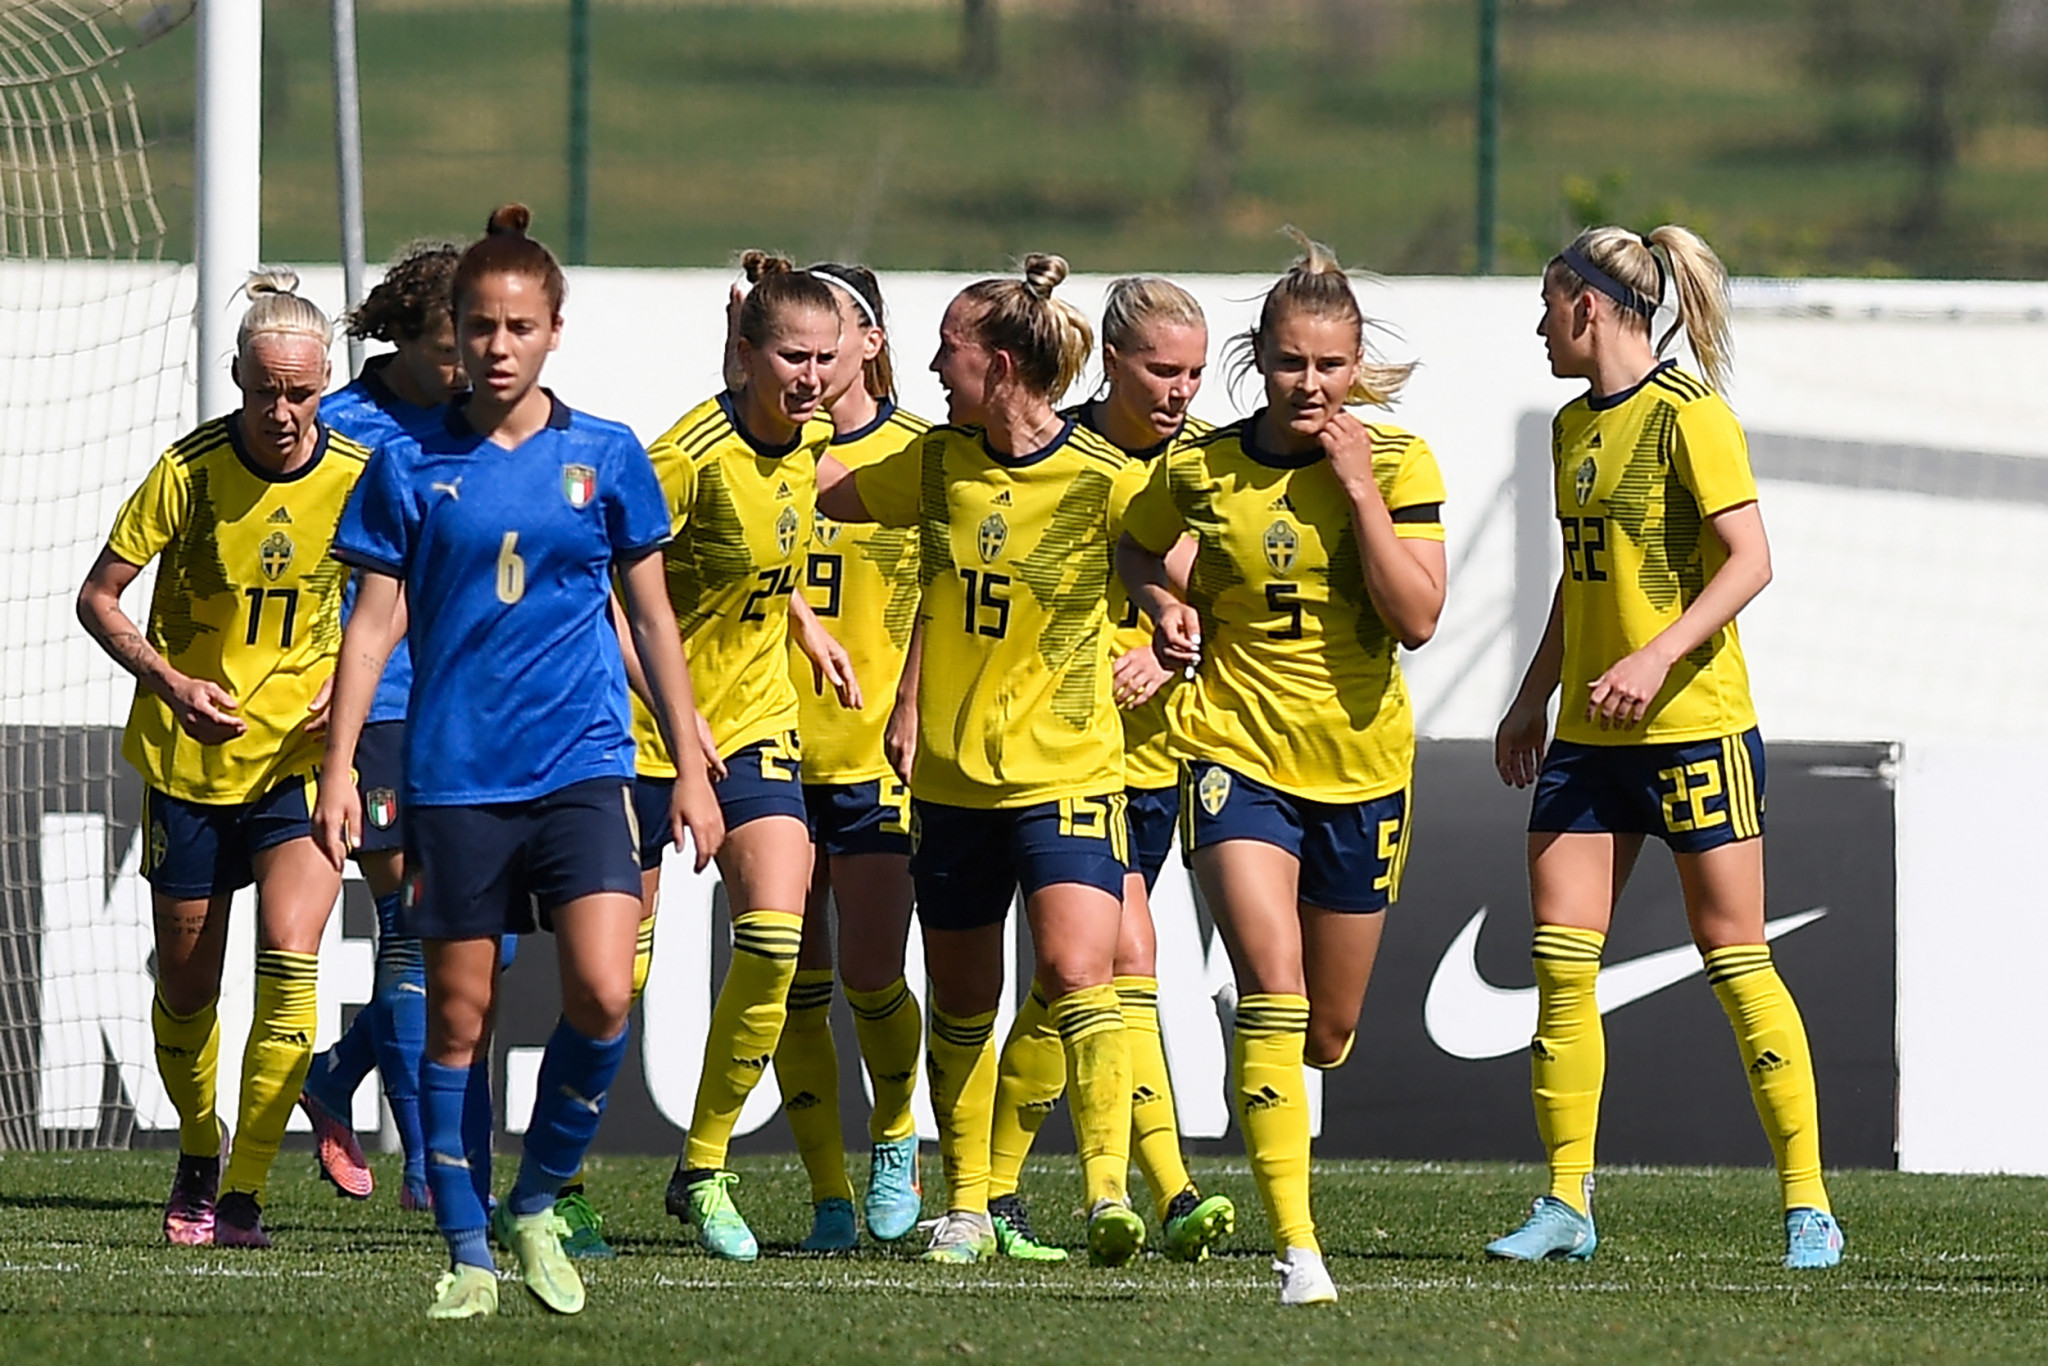 Sweden refuse to play Russia at Women's Euro 2022 should suspension be lifted